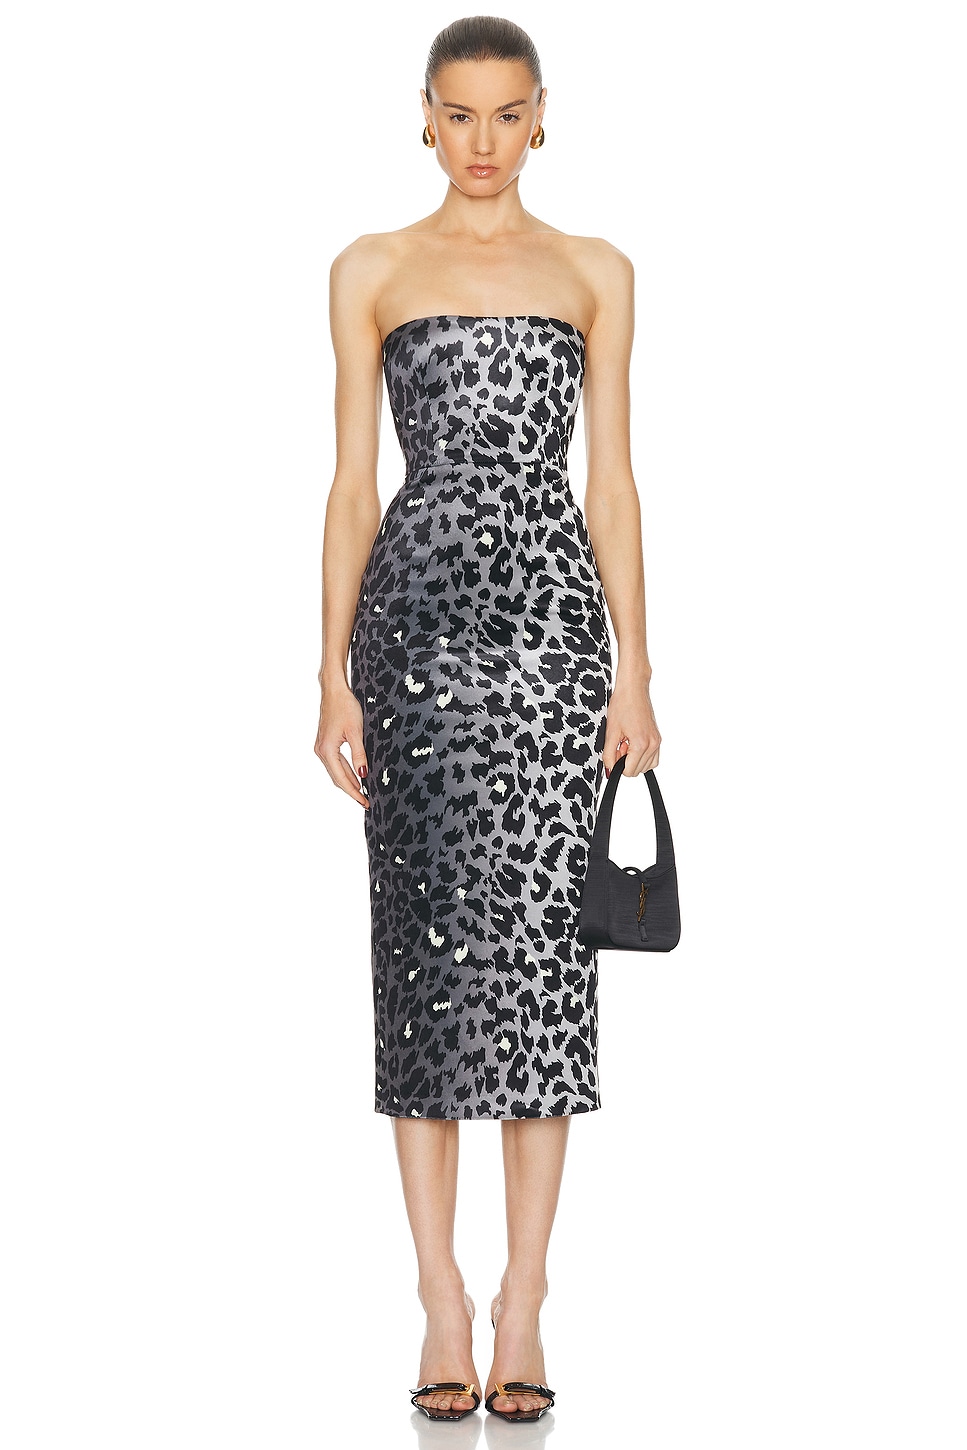 Image 1 of Alex Perry Strapless Dress in Silver Leopard